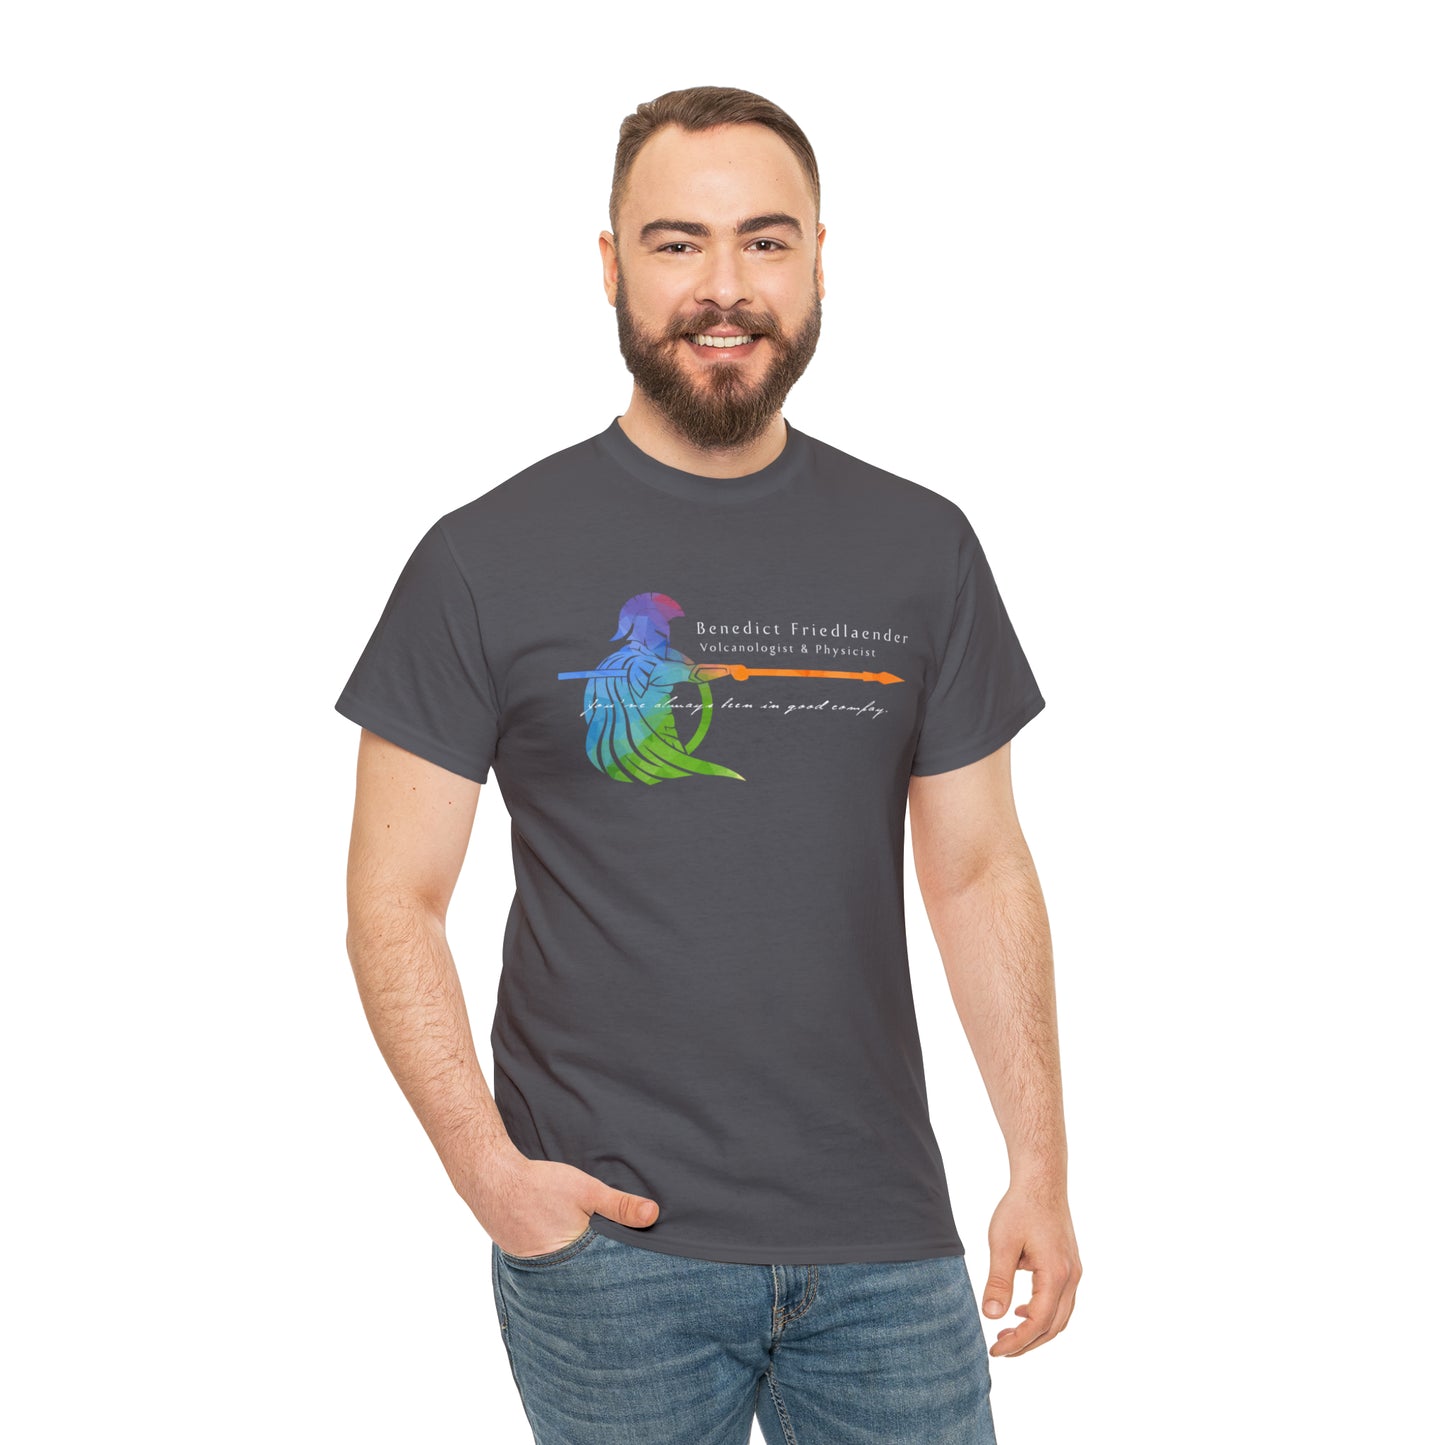 Benedict Friedlaender | Volcanologist & Physicist | Pride T-Shirt Zoologist Gay Queer LGBTQ